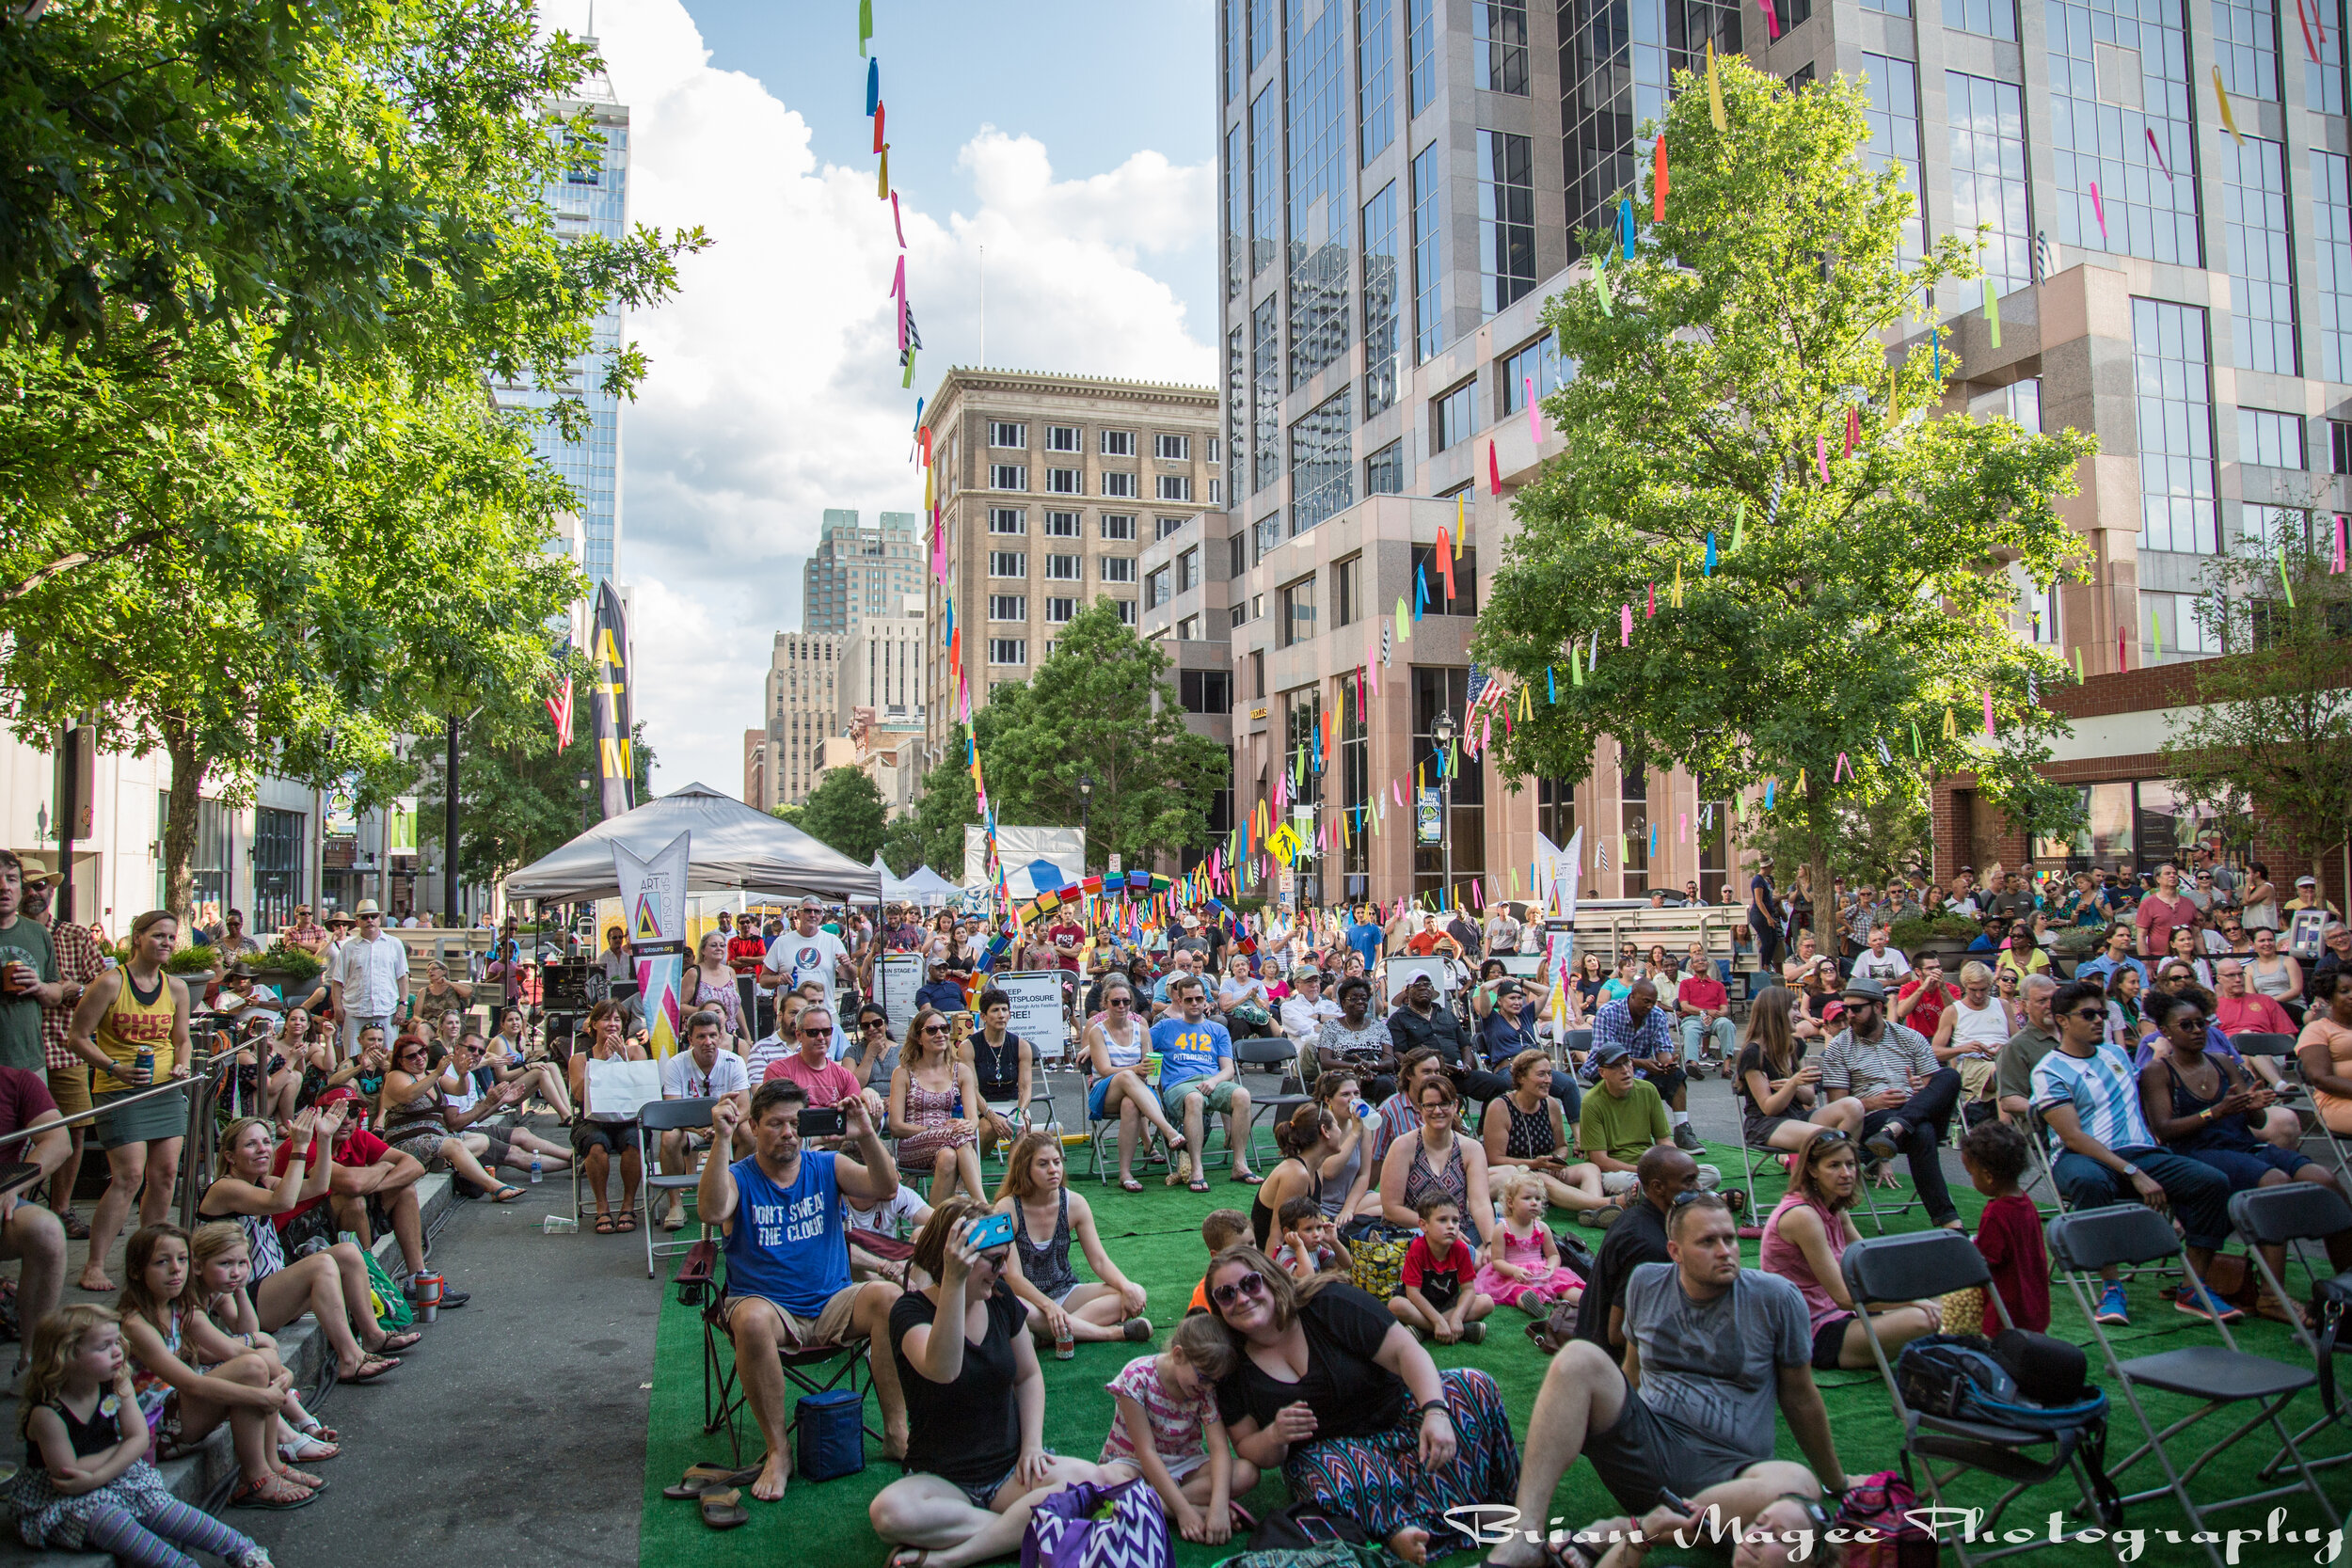 Artsplosure :: Raleigh's arts and cultural event production studio